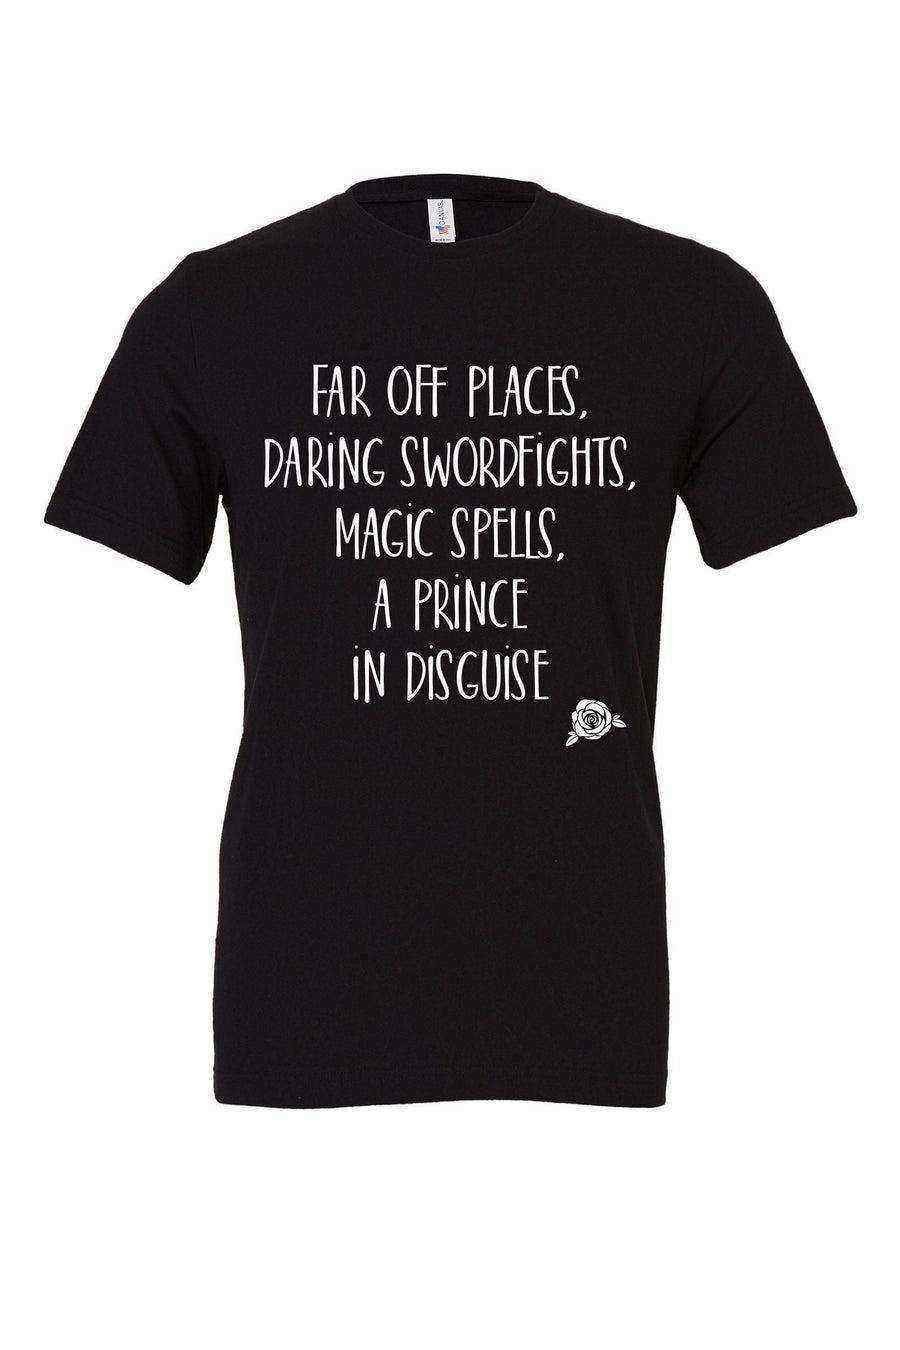 Far off Places White Print Tee - Dylan's Tees